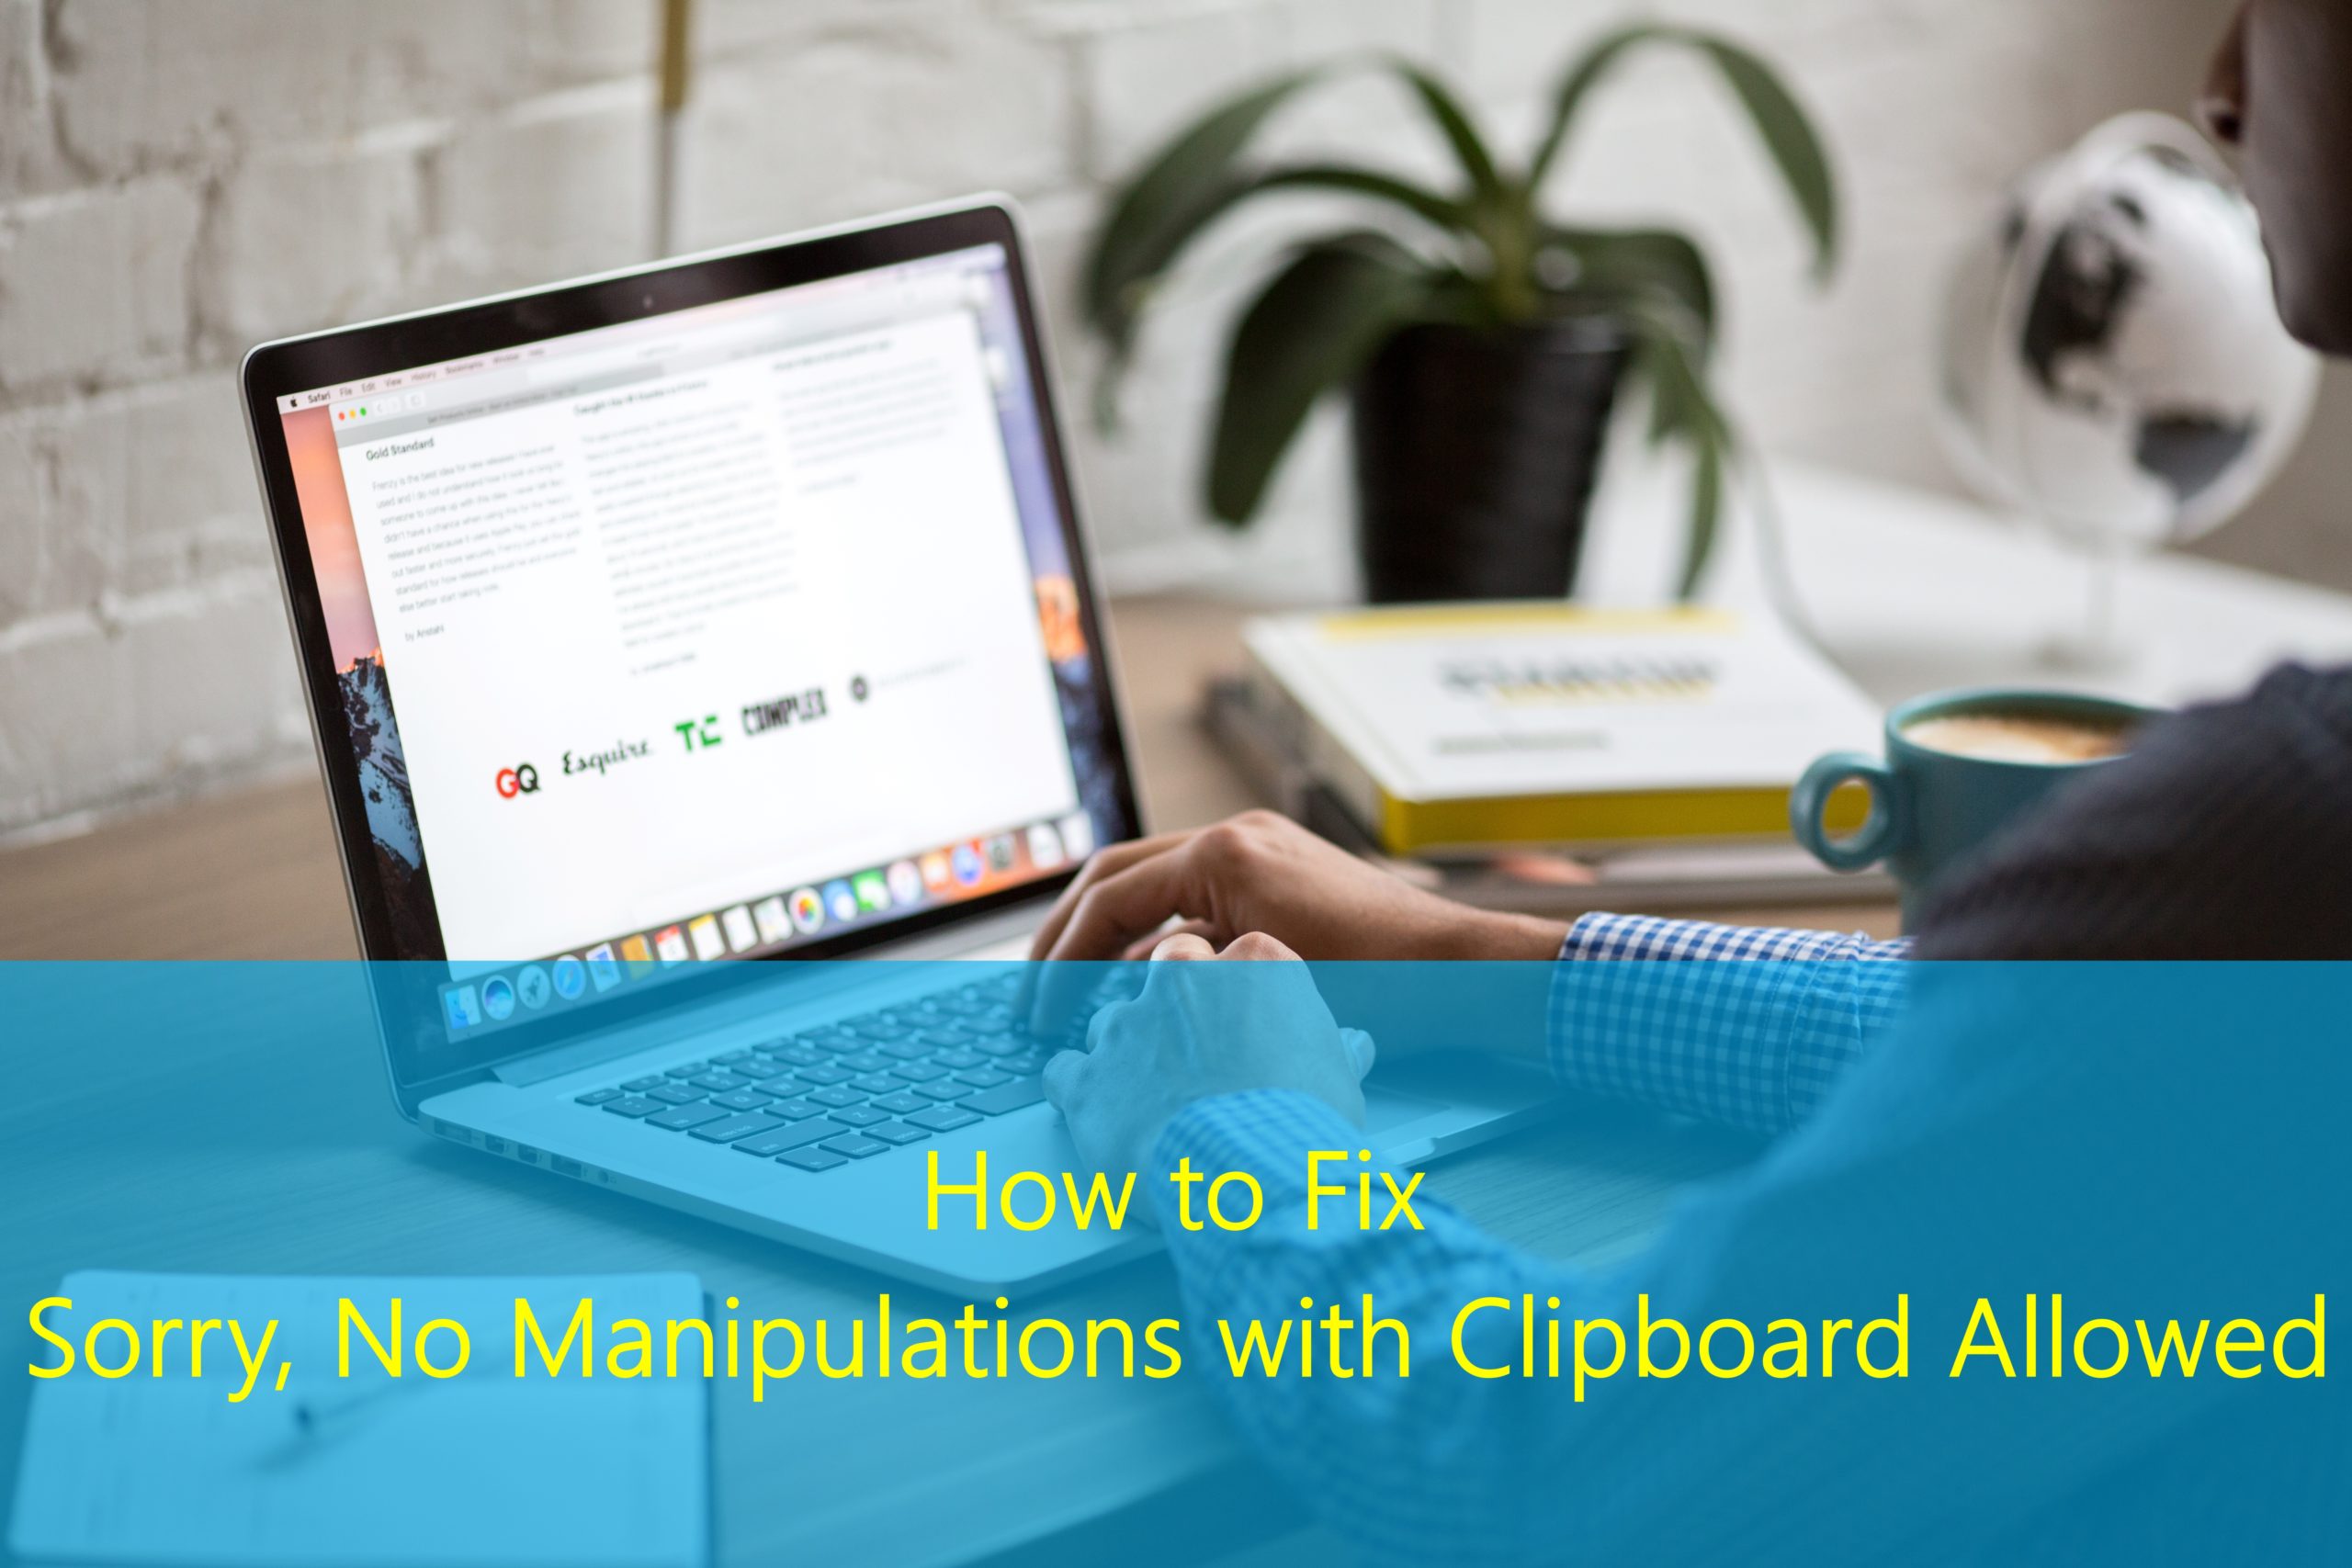 Sorry, No Manipulations with Clipboard Allowed